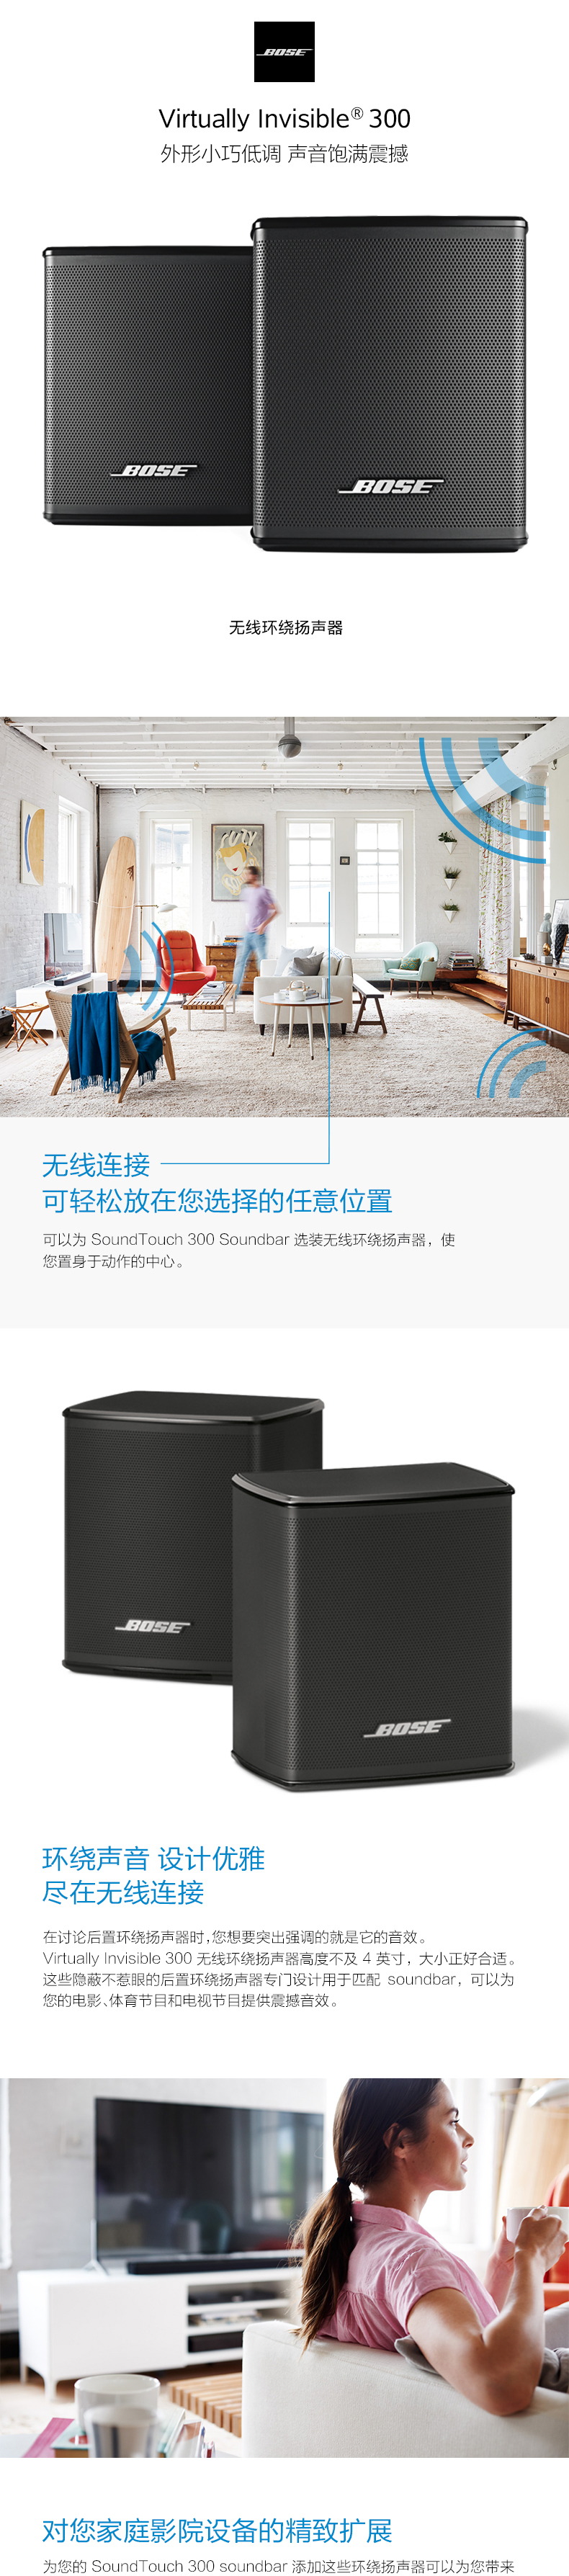 Bose Virtually Invisible 300 无线后环绕扬声器 专为Soundtouch 300设计